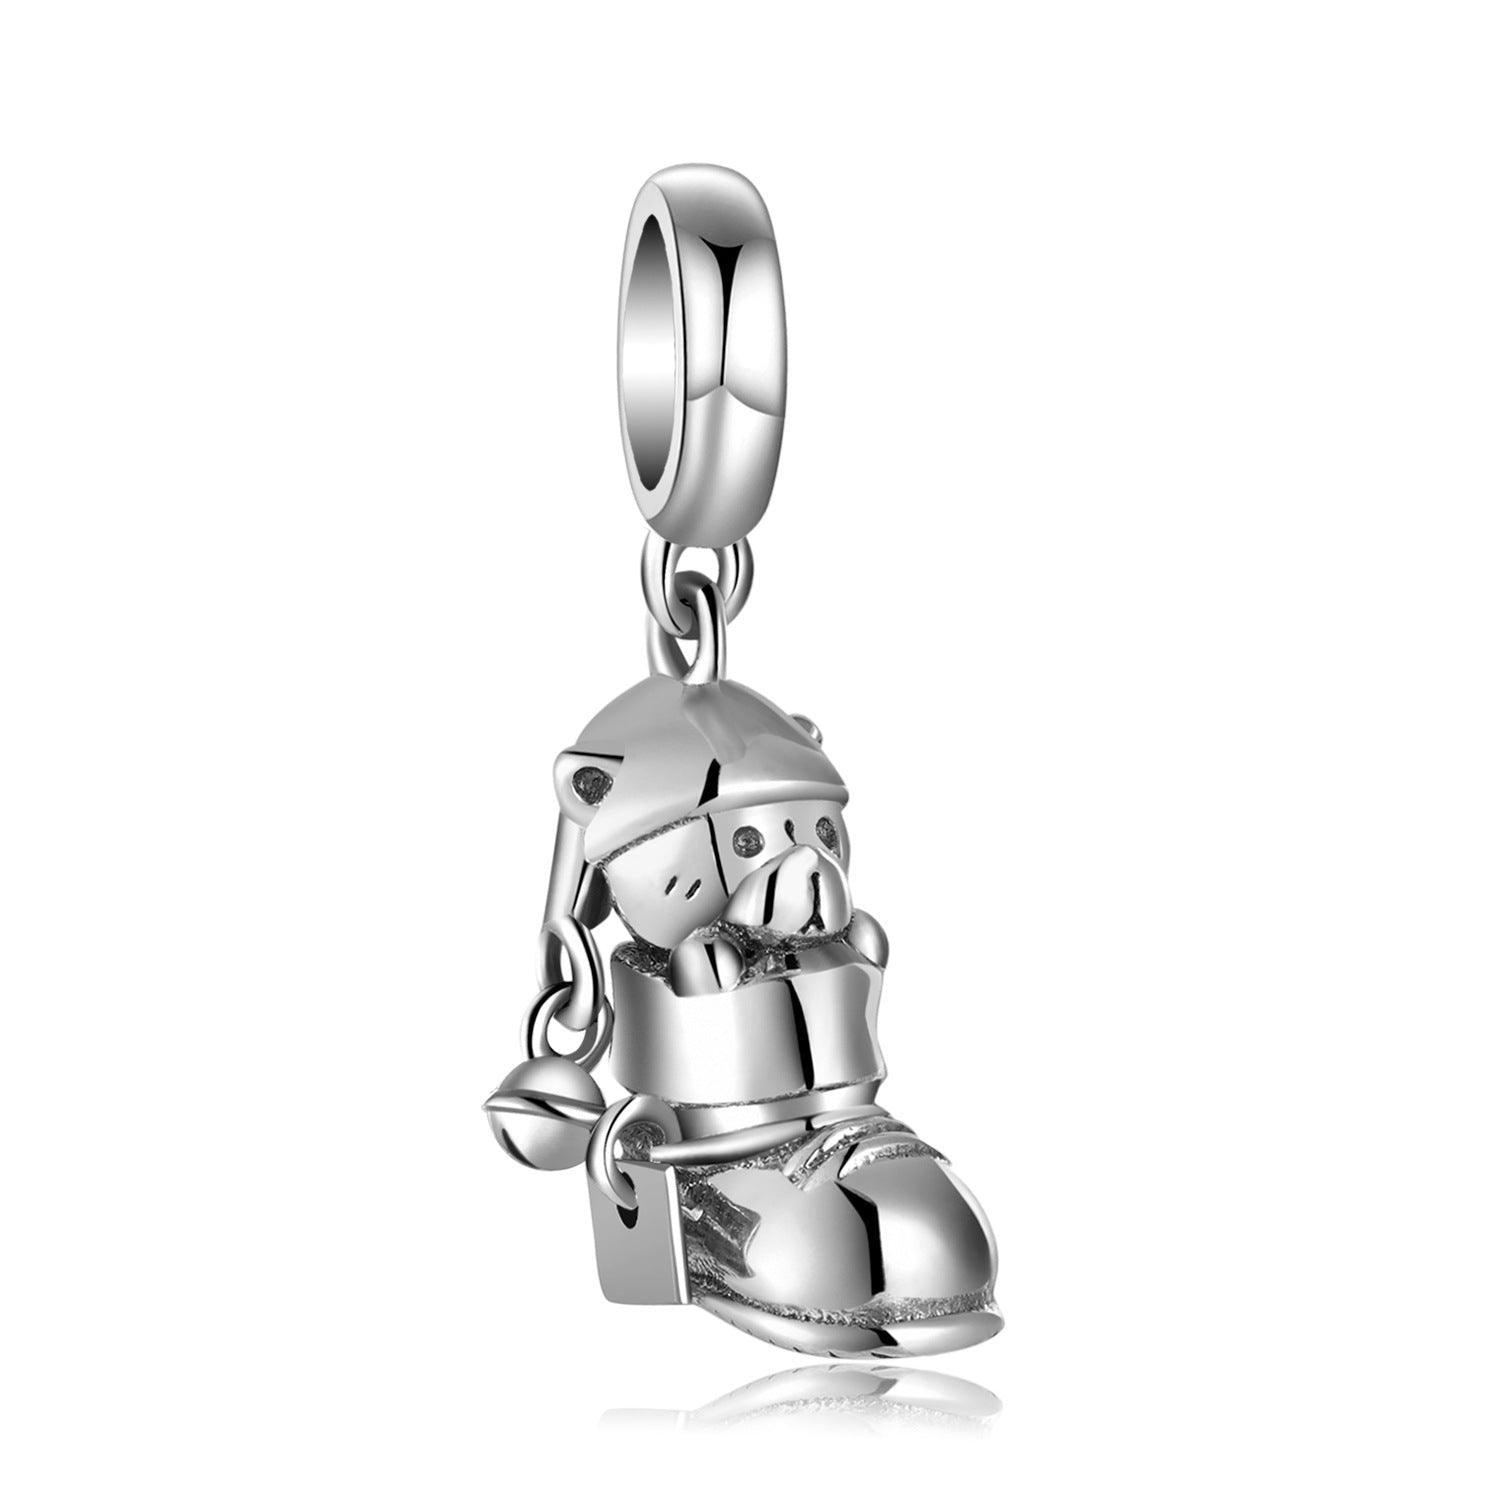 Cute Bear Plain Silver Charm Bracelet Beads in 2023 | Cute Bear Plain Silver Charm Bracelet Beads - undefined | Charm Bracelet Beads for Bracelets, Cute Bear Plain Silver Charm Bracelet Beads, Cute Charm, S925 Silver Charms & Pendants | From Hunny Life | hunnylife.com